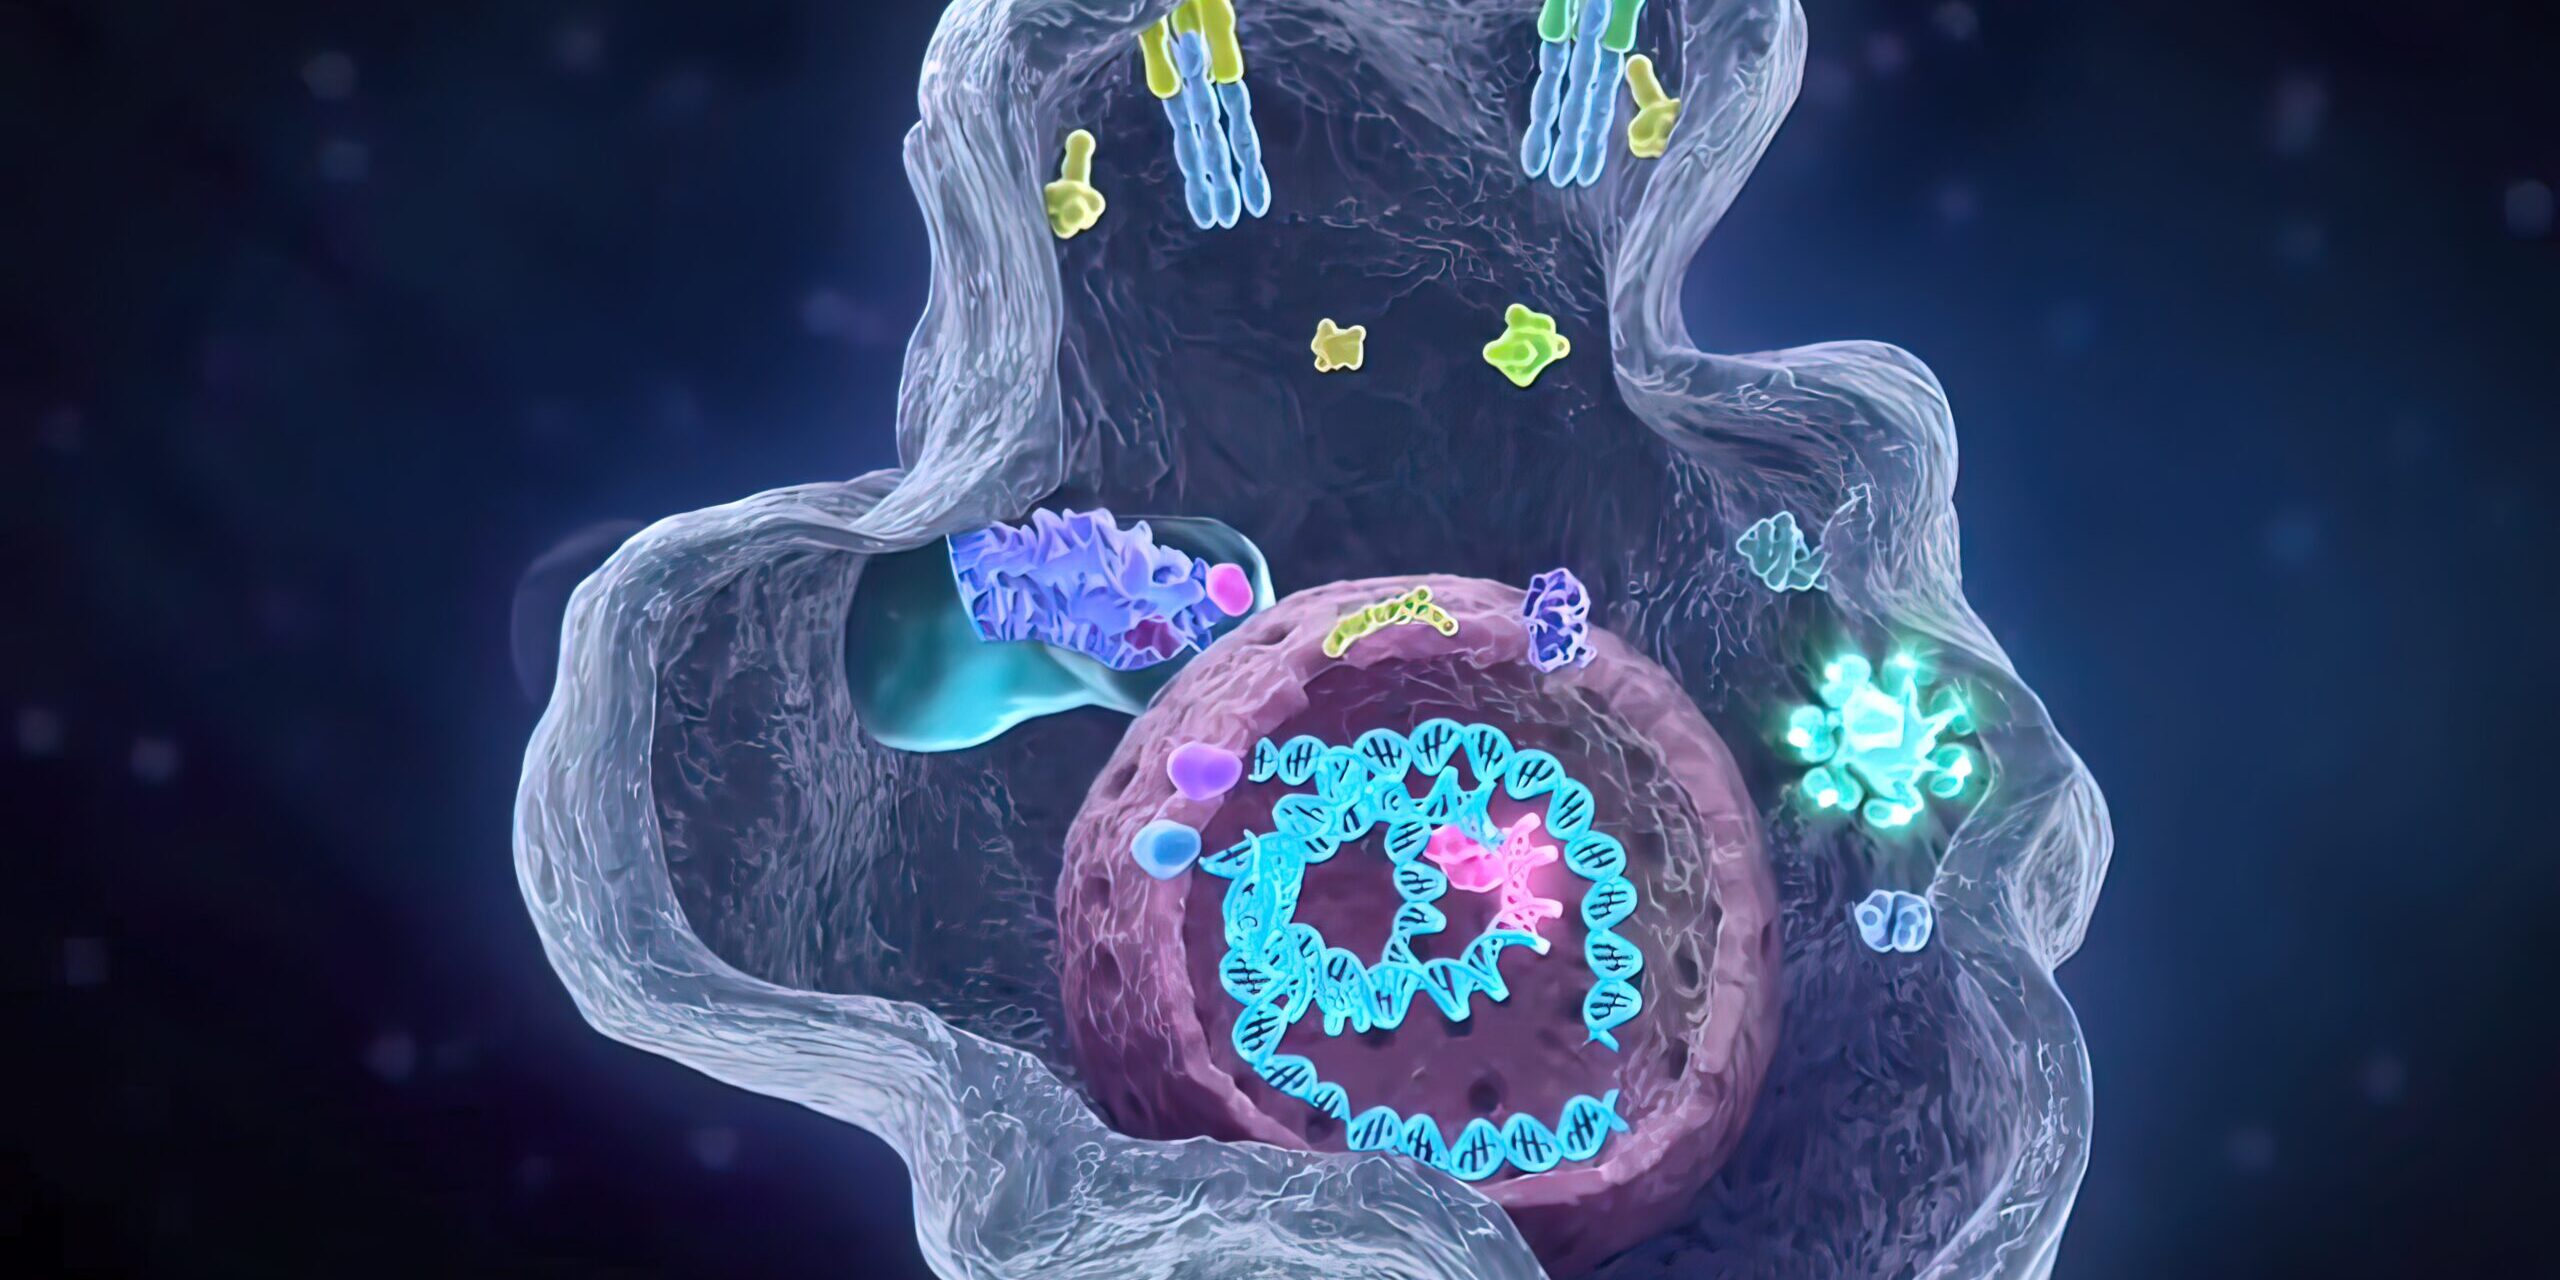 Current, occurring, or functioning state within a cell. Cell functions. 3D illustration